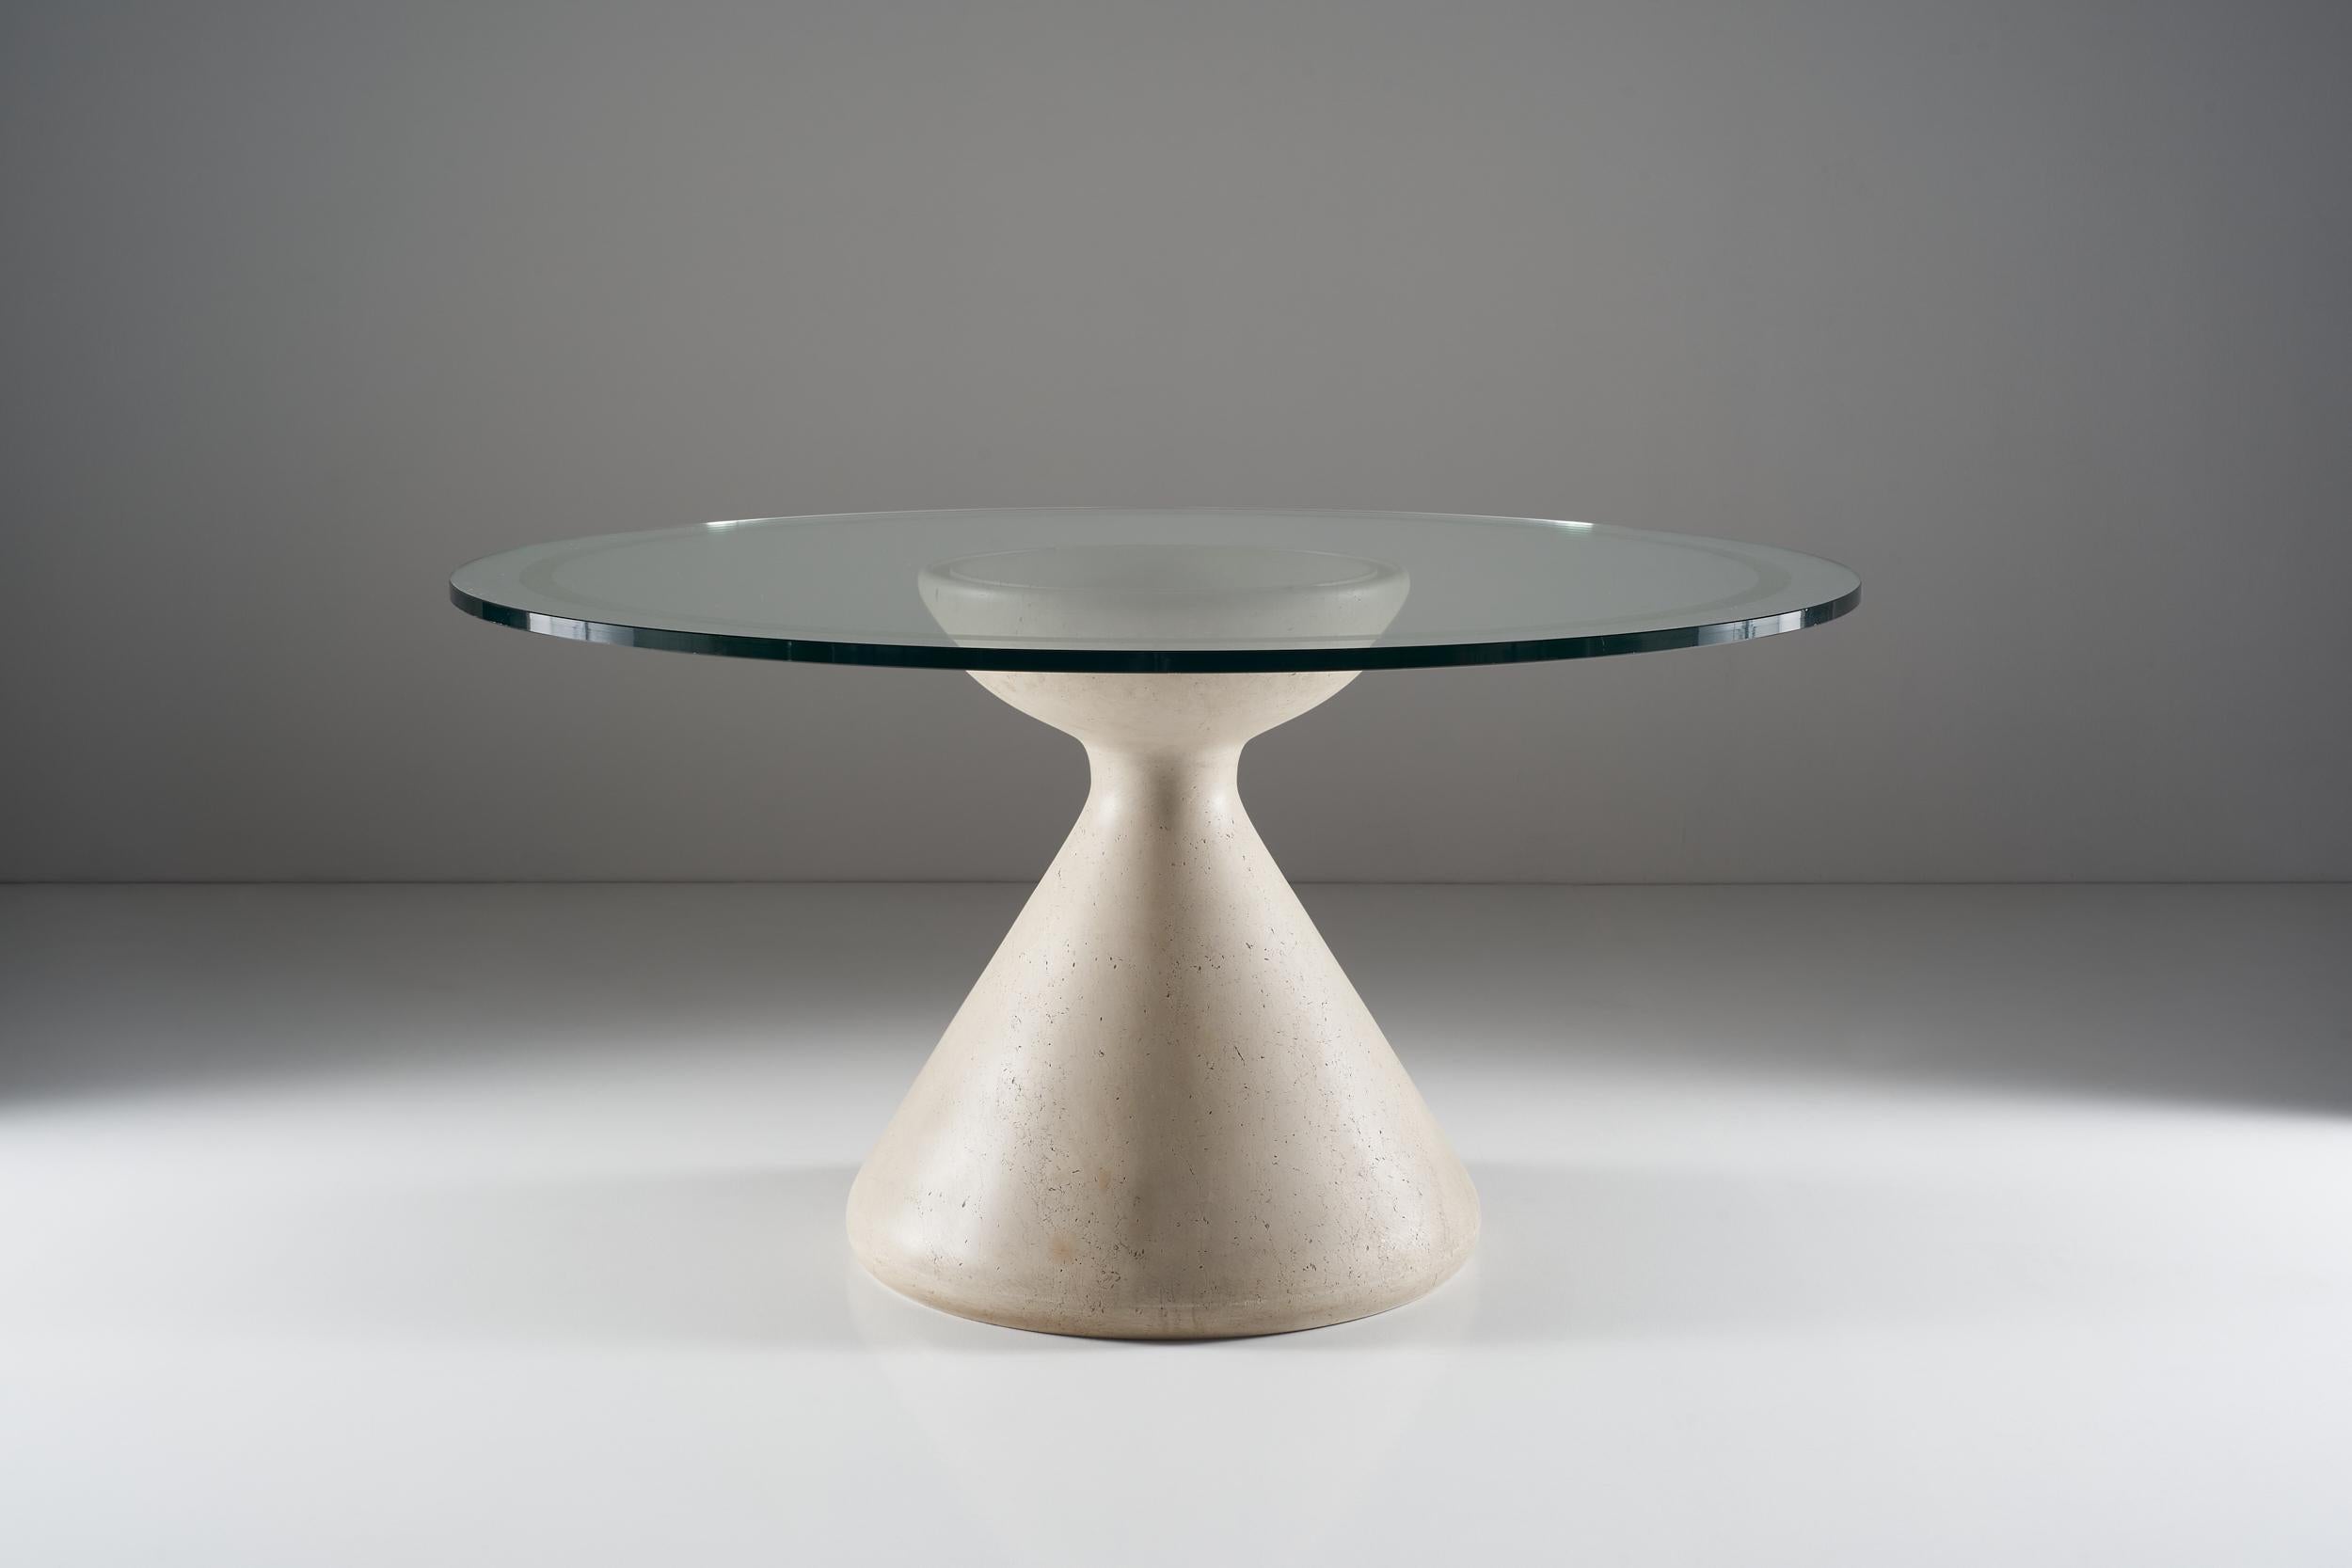 This table shaped by the simple and cohesive ideas of Vittorio Introini is an absolute example of Italian manufacturing beauty. The large crystal top highlights its expressive and static power, the lathe-worked, polished and smooth Carrara marble